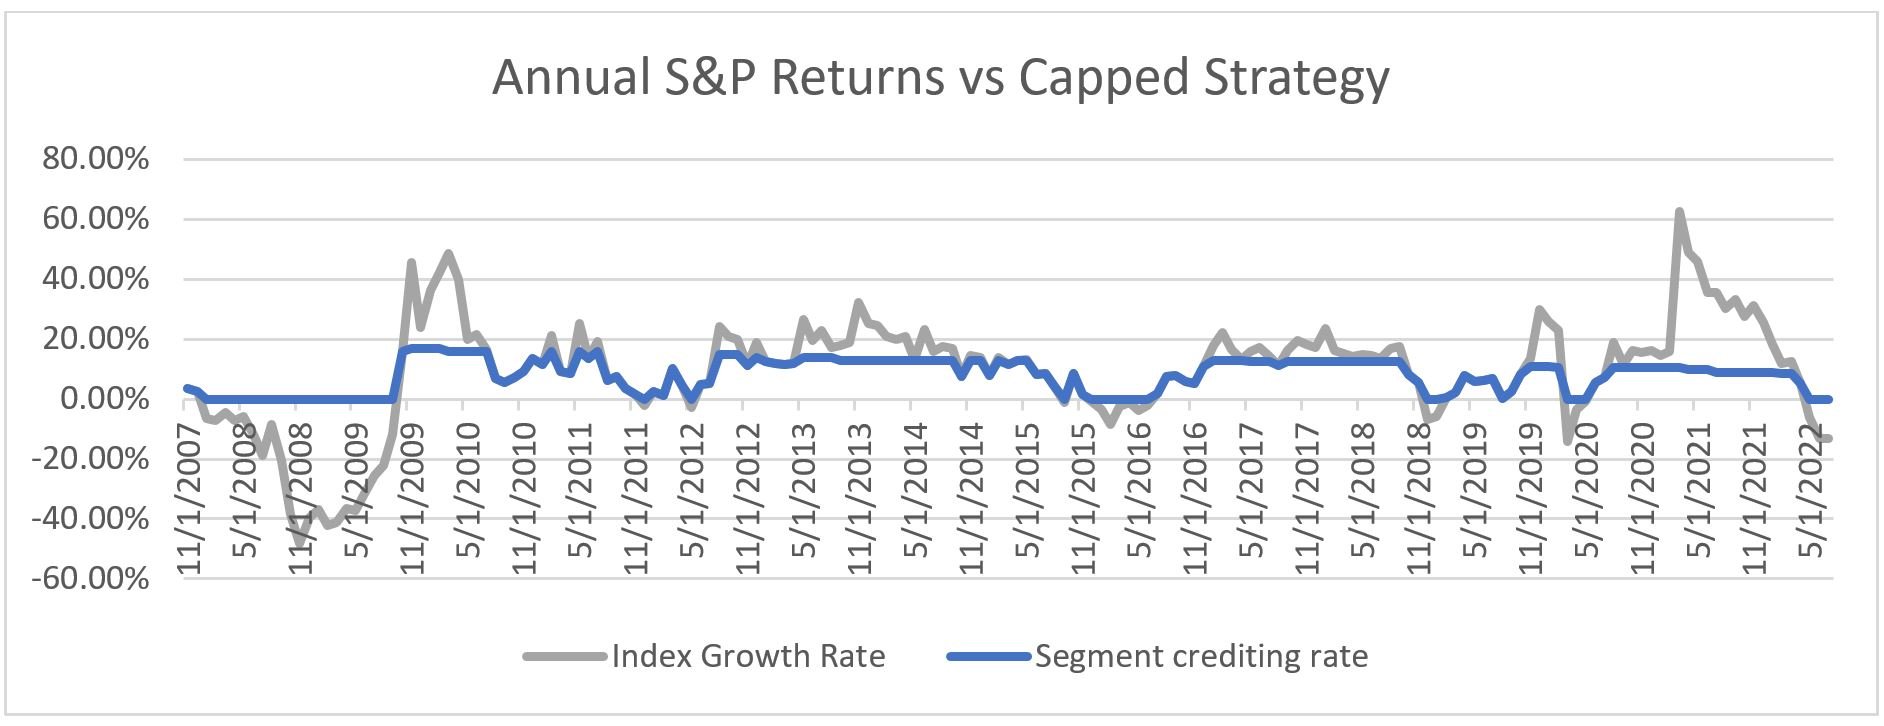 Annual S&P Returns vs Capped Strategy